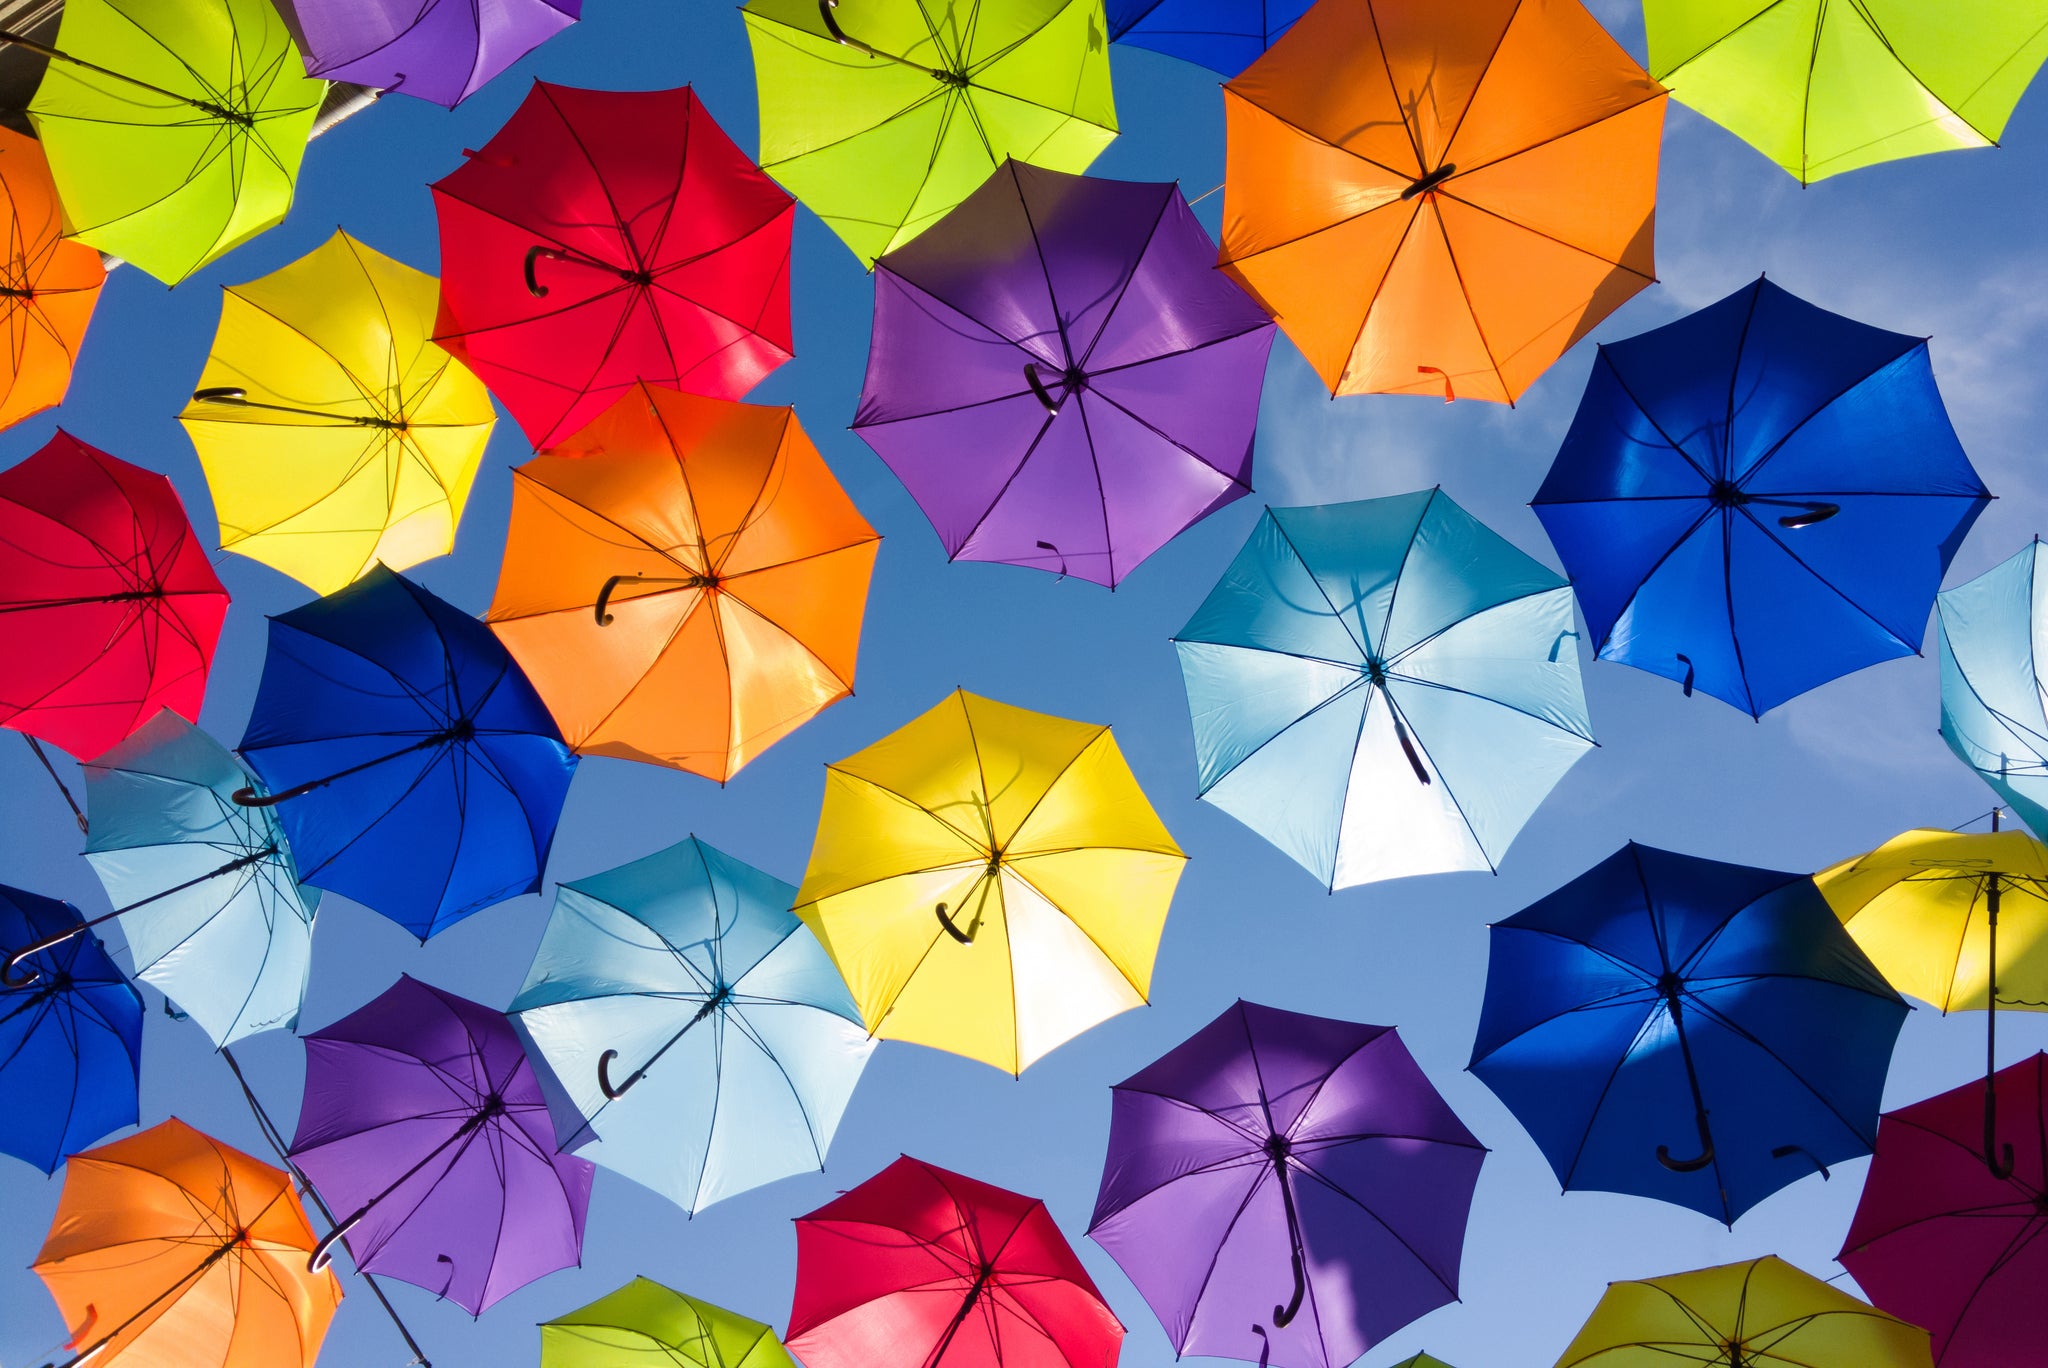 Everything you need to know about Umbrella